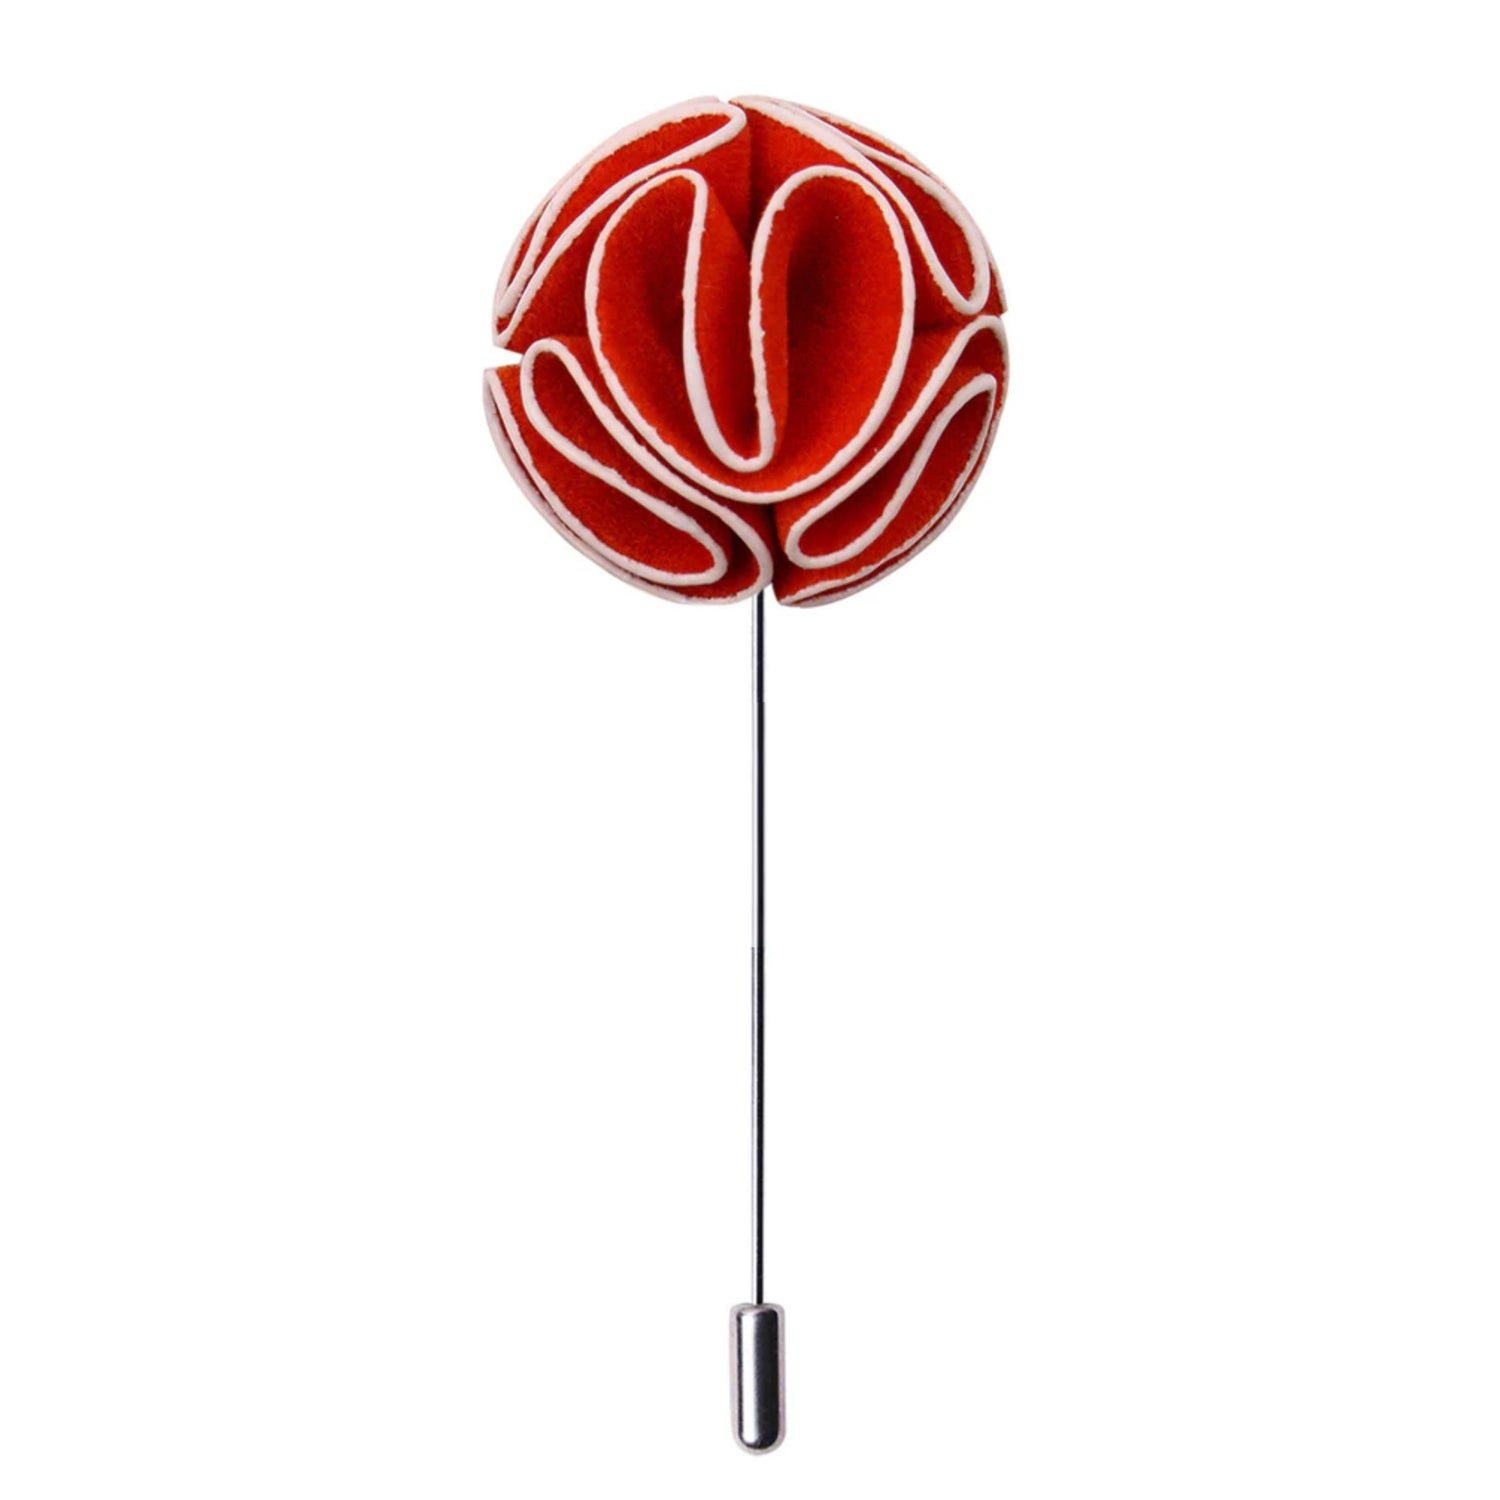 Main View: A Red, White Leafy Petal Flower Shaped Lapel Pin||Red, White